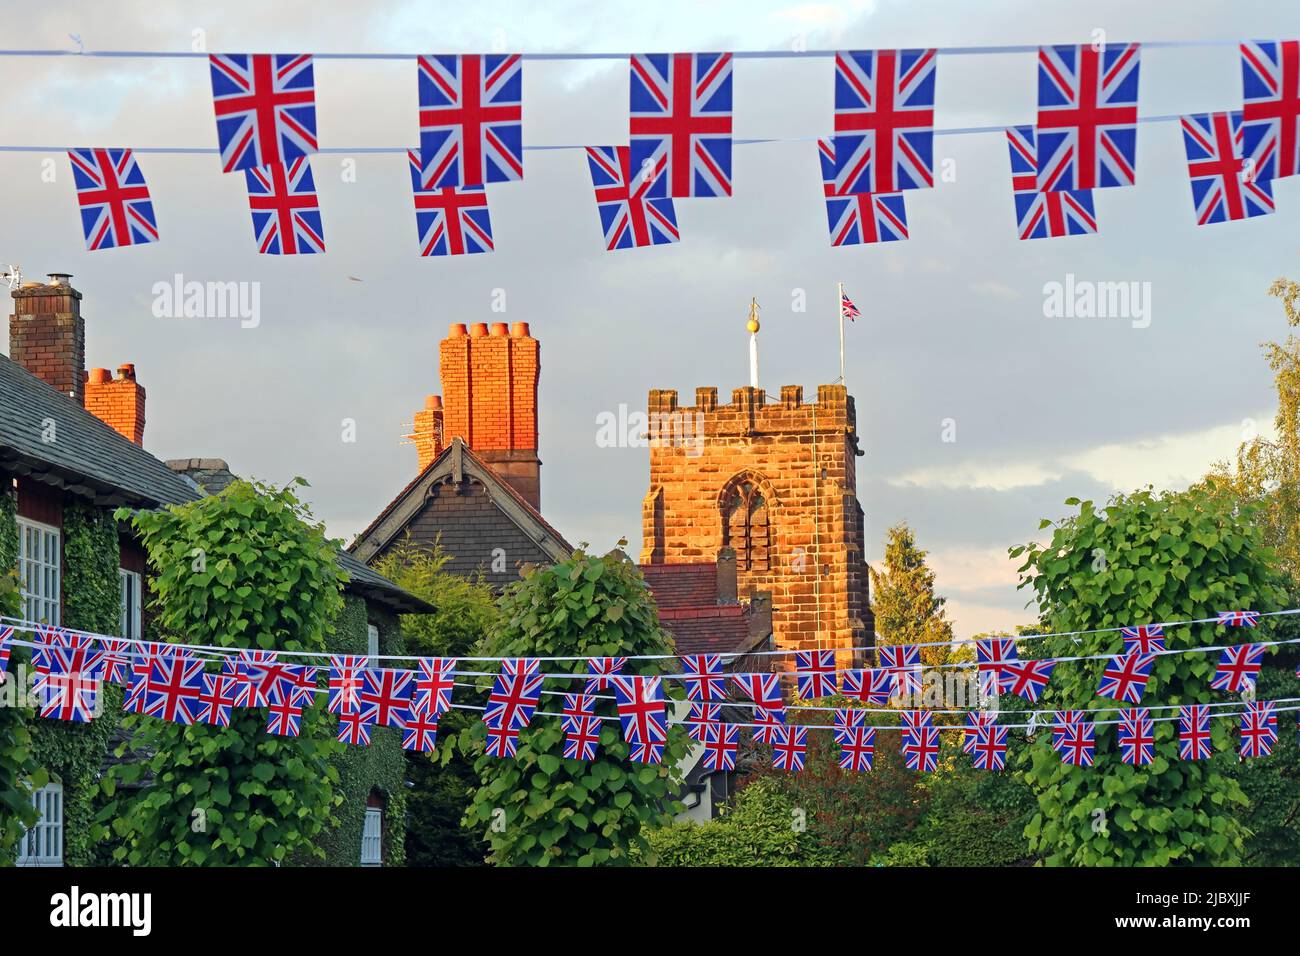 Great Britain UK Union flags and bunting flying in Grappenhall Village, Warrington, Cheshire, England, UK, WA4, for royal celebrations Stock Photo